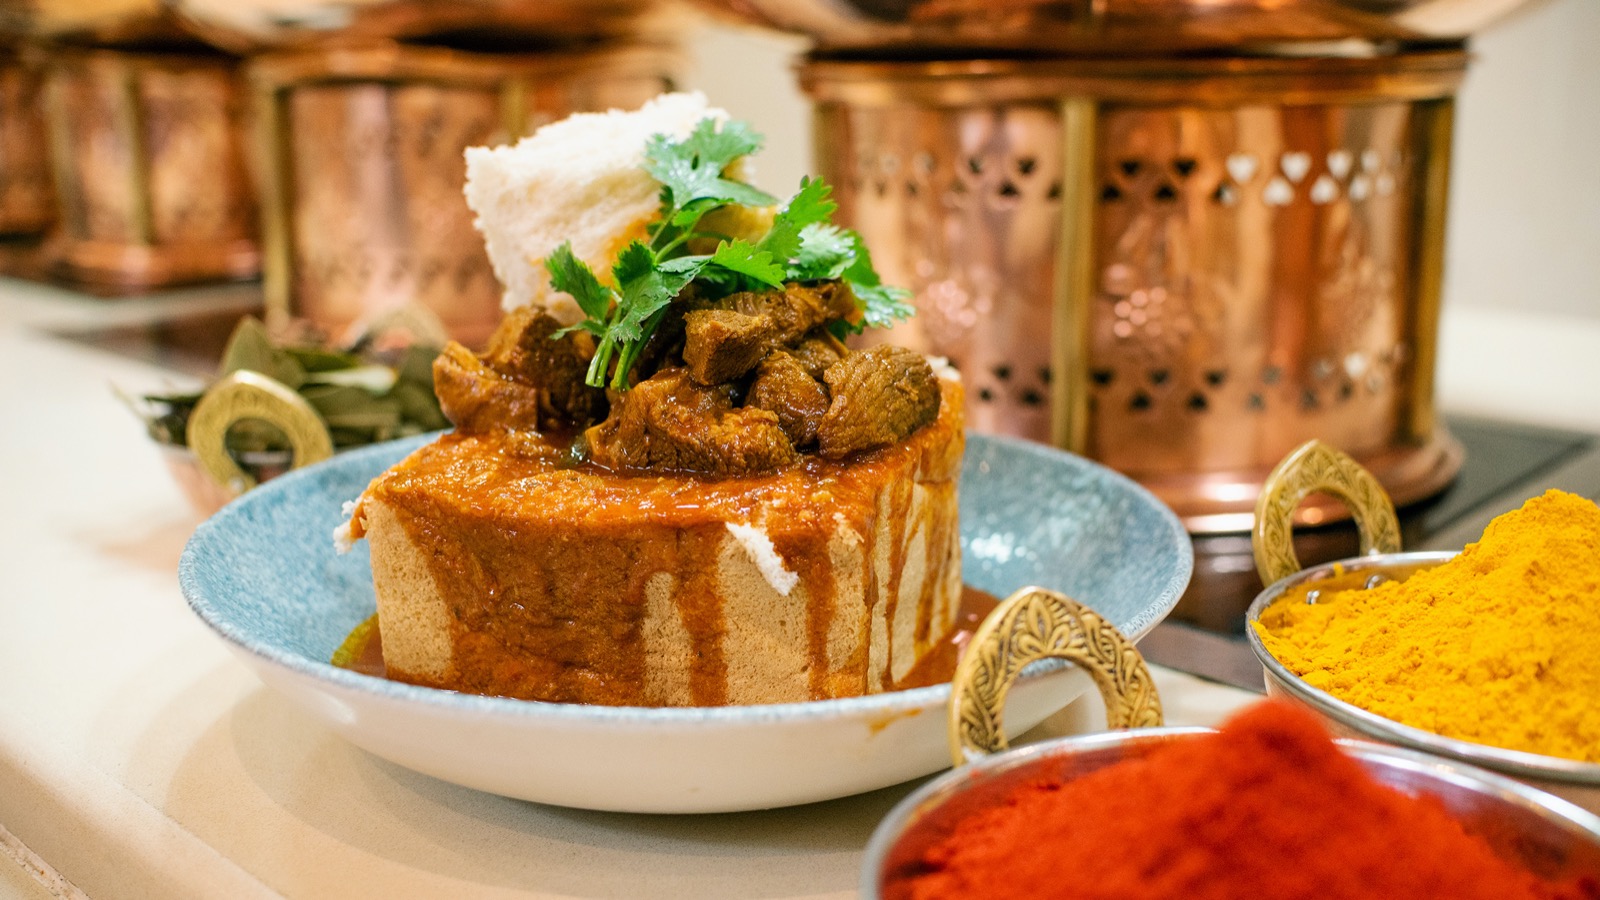 Bunny chow from South Africa